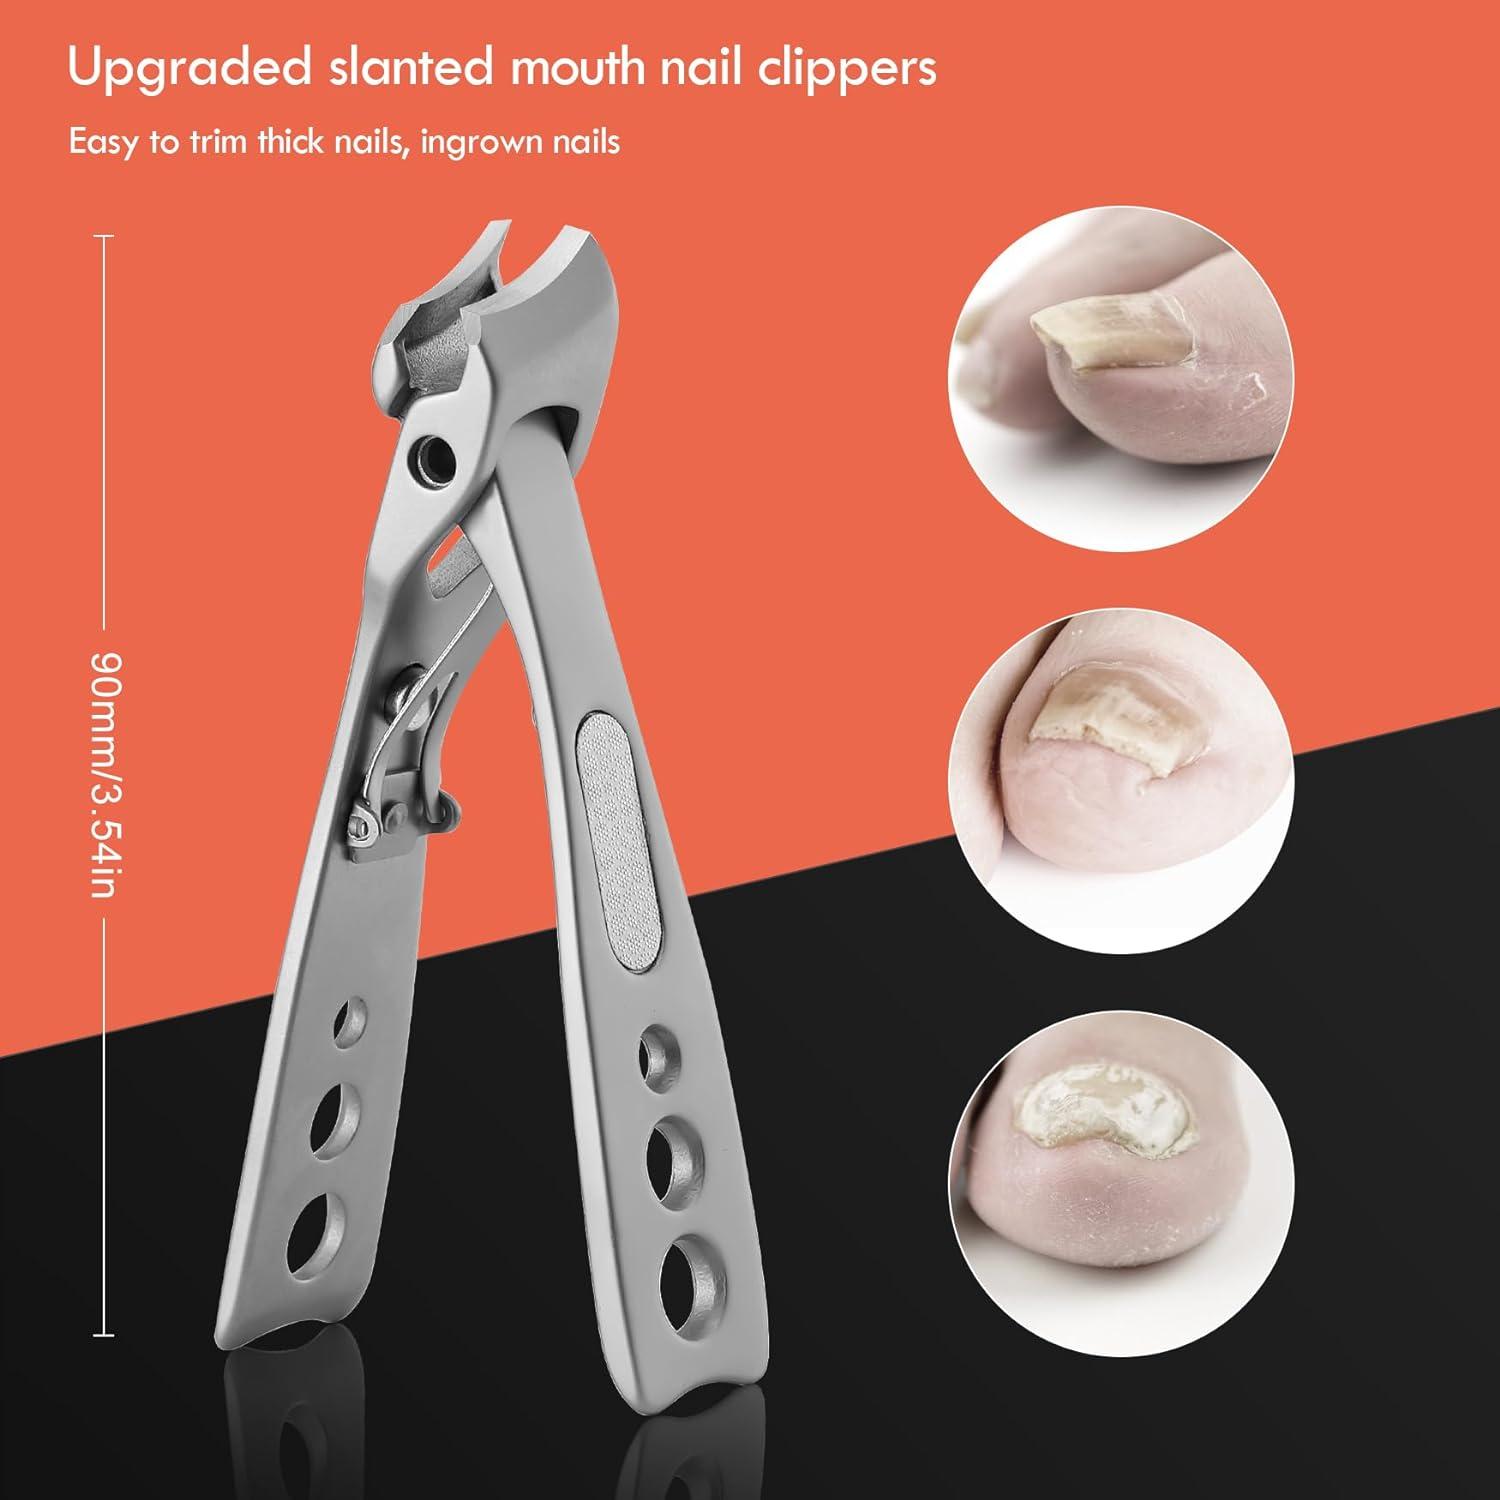 BEZOX Toenail Clippers: Premium Nail Clippers for Ingrown…